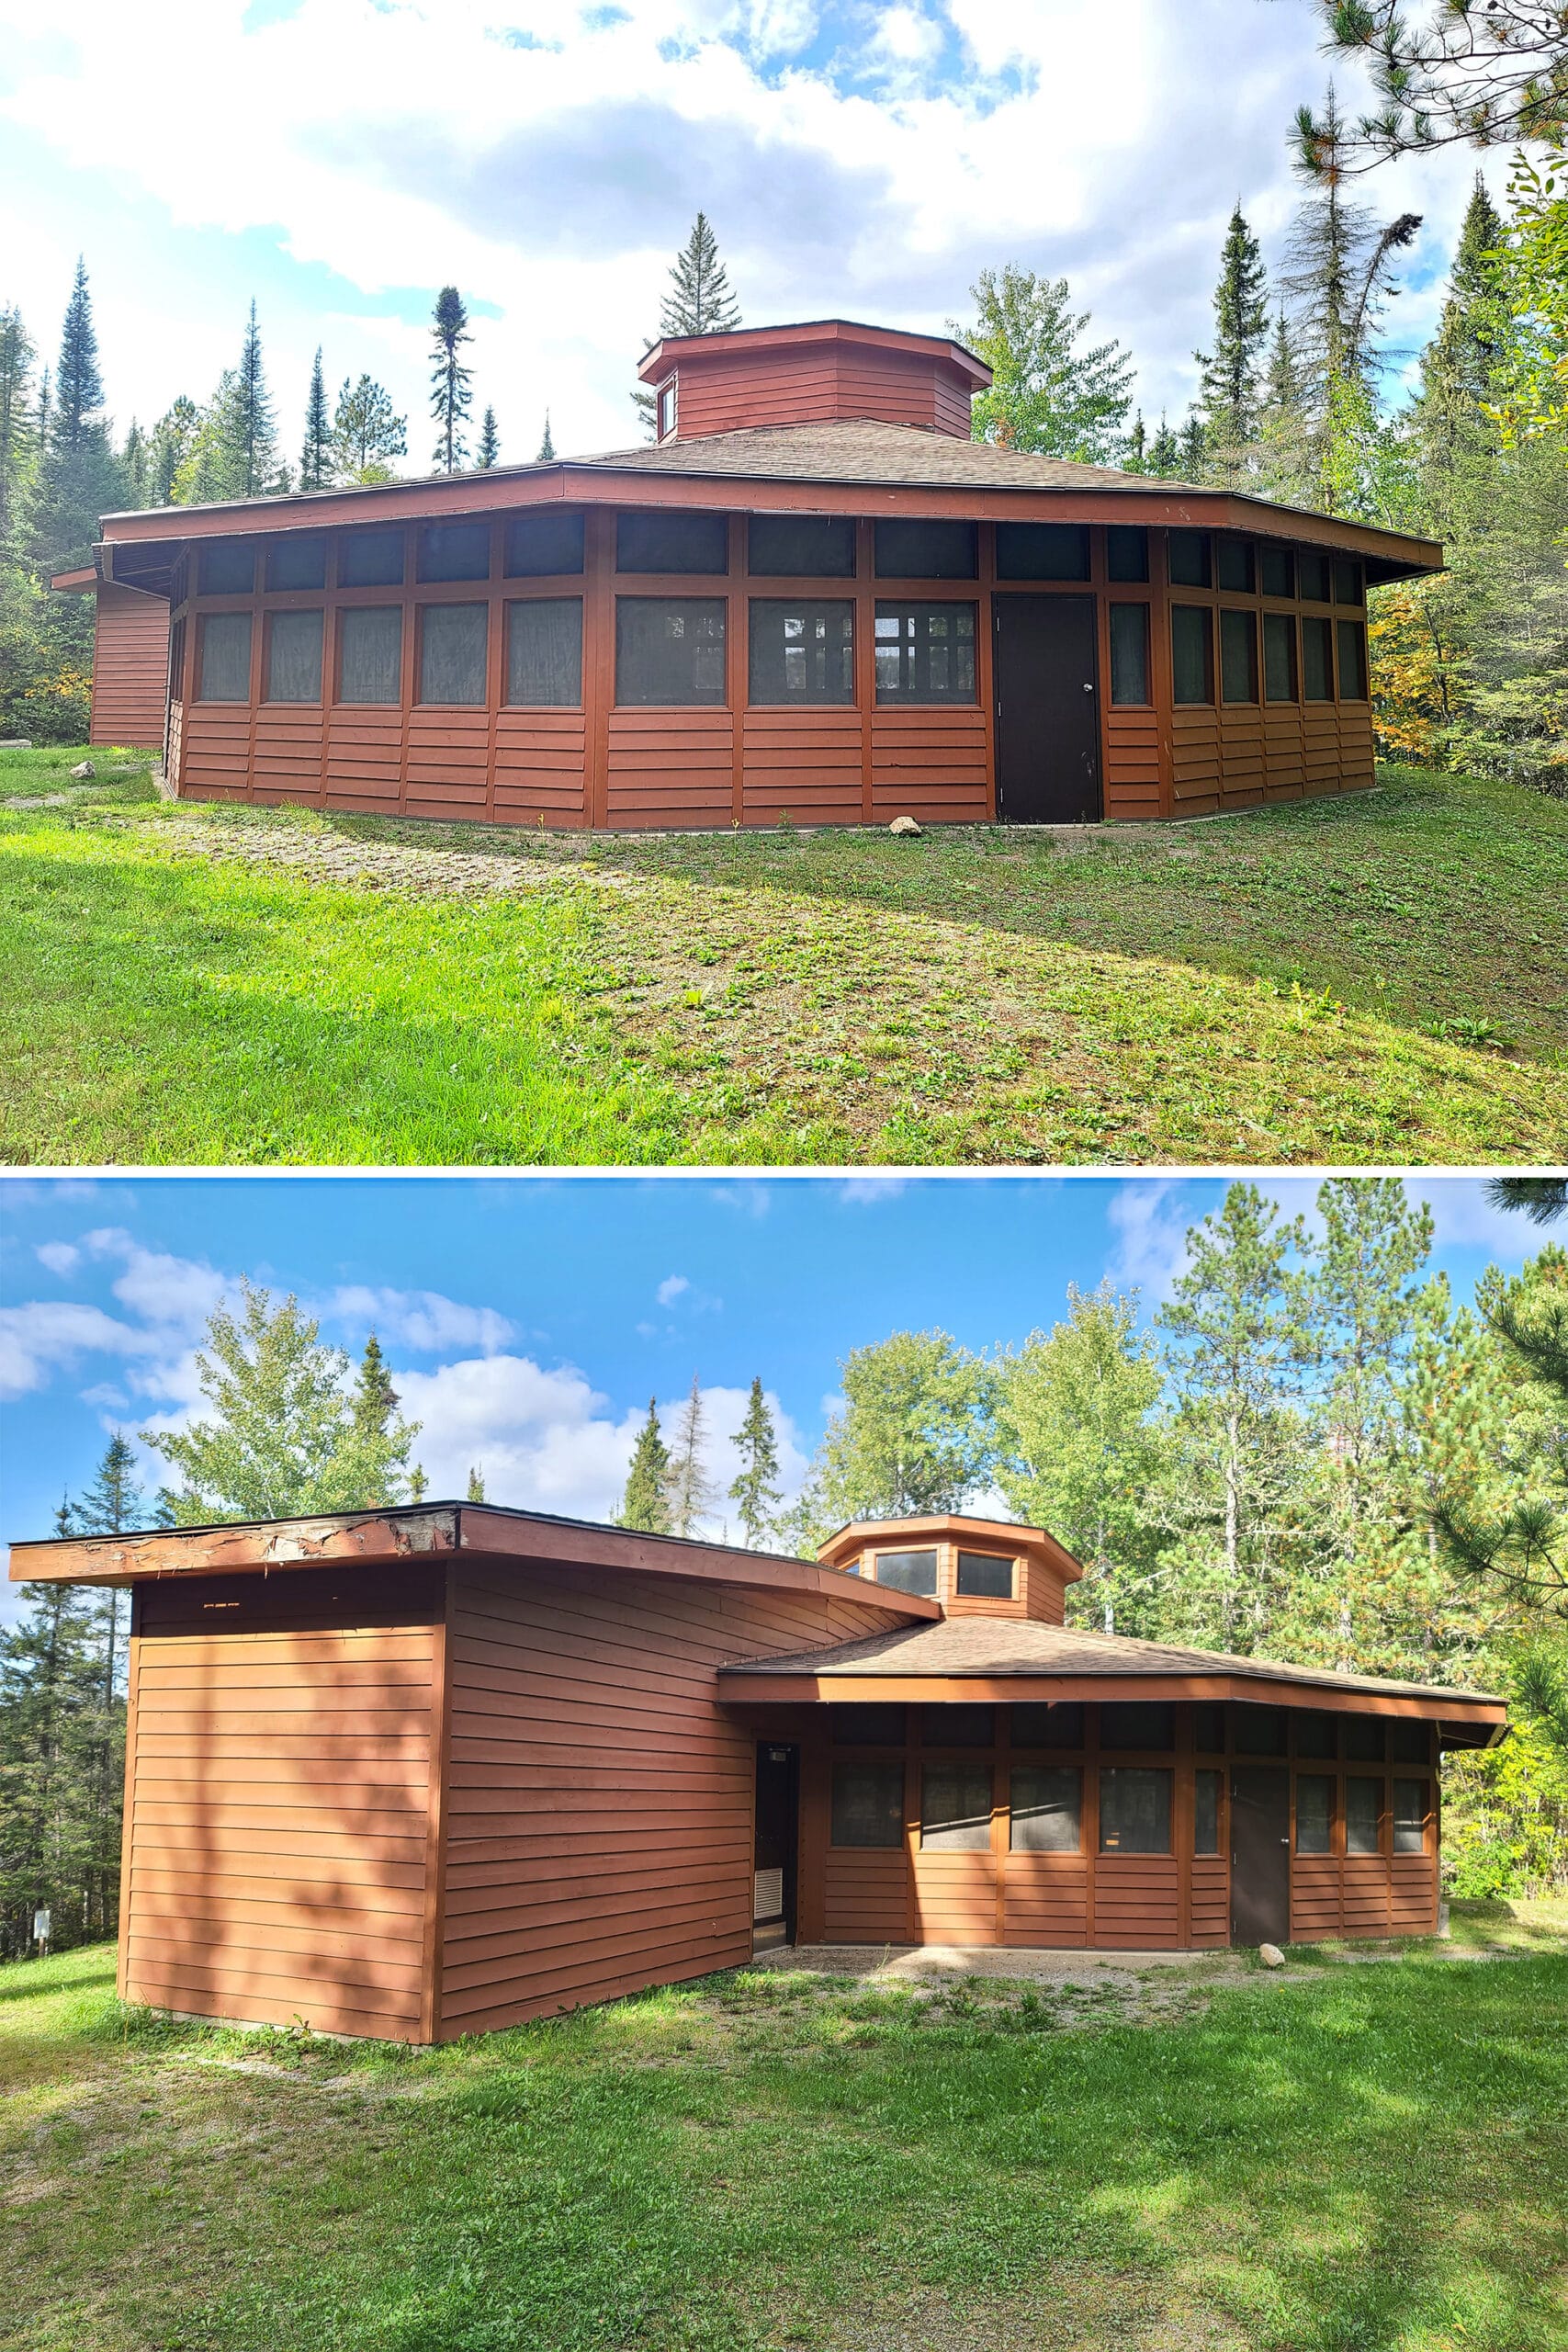 A 2 part image showing the front and back views of the learning centre in quetico provincial park.